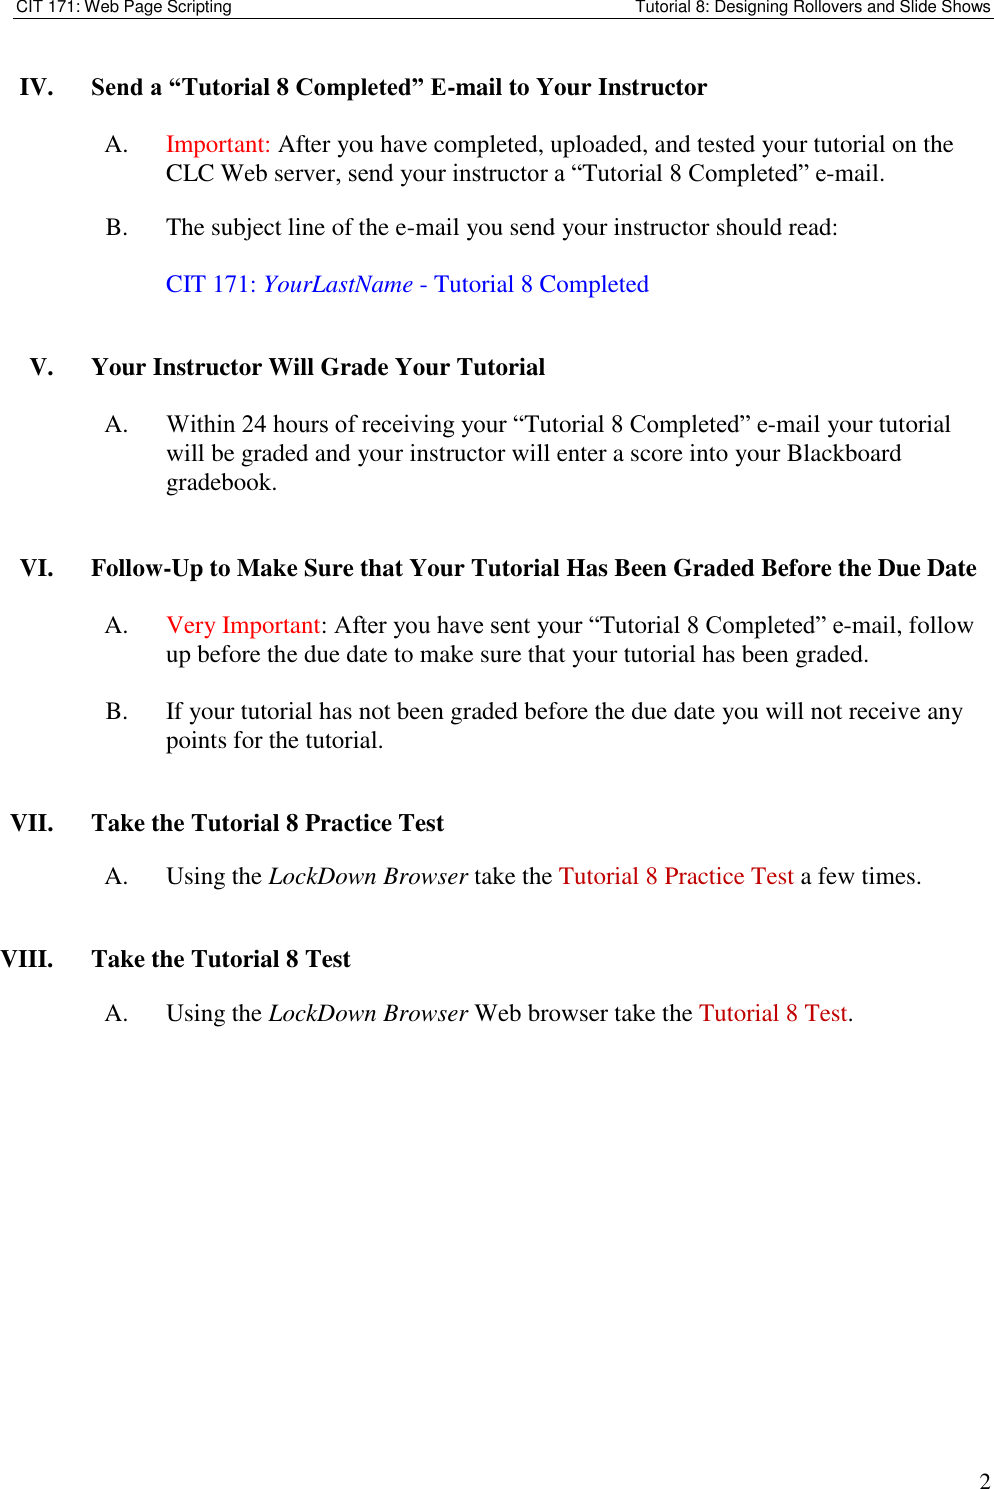 Page 2 of 2 - Tutorial 3 Instructions 08